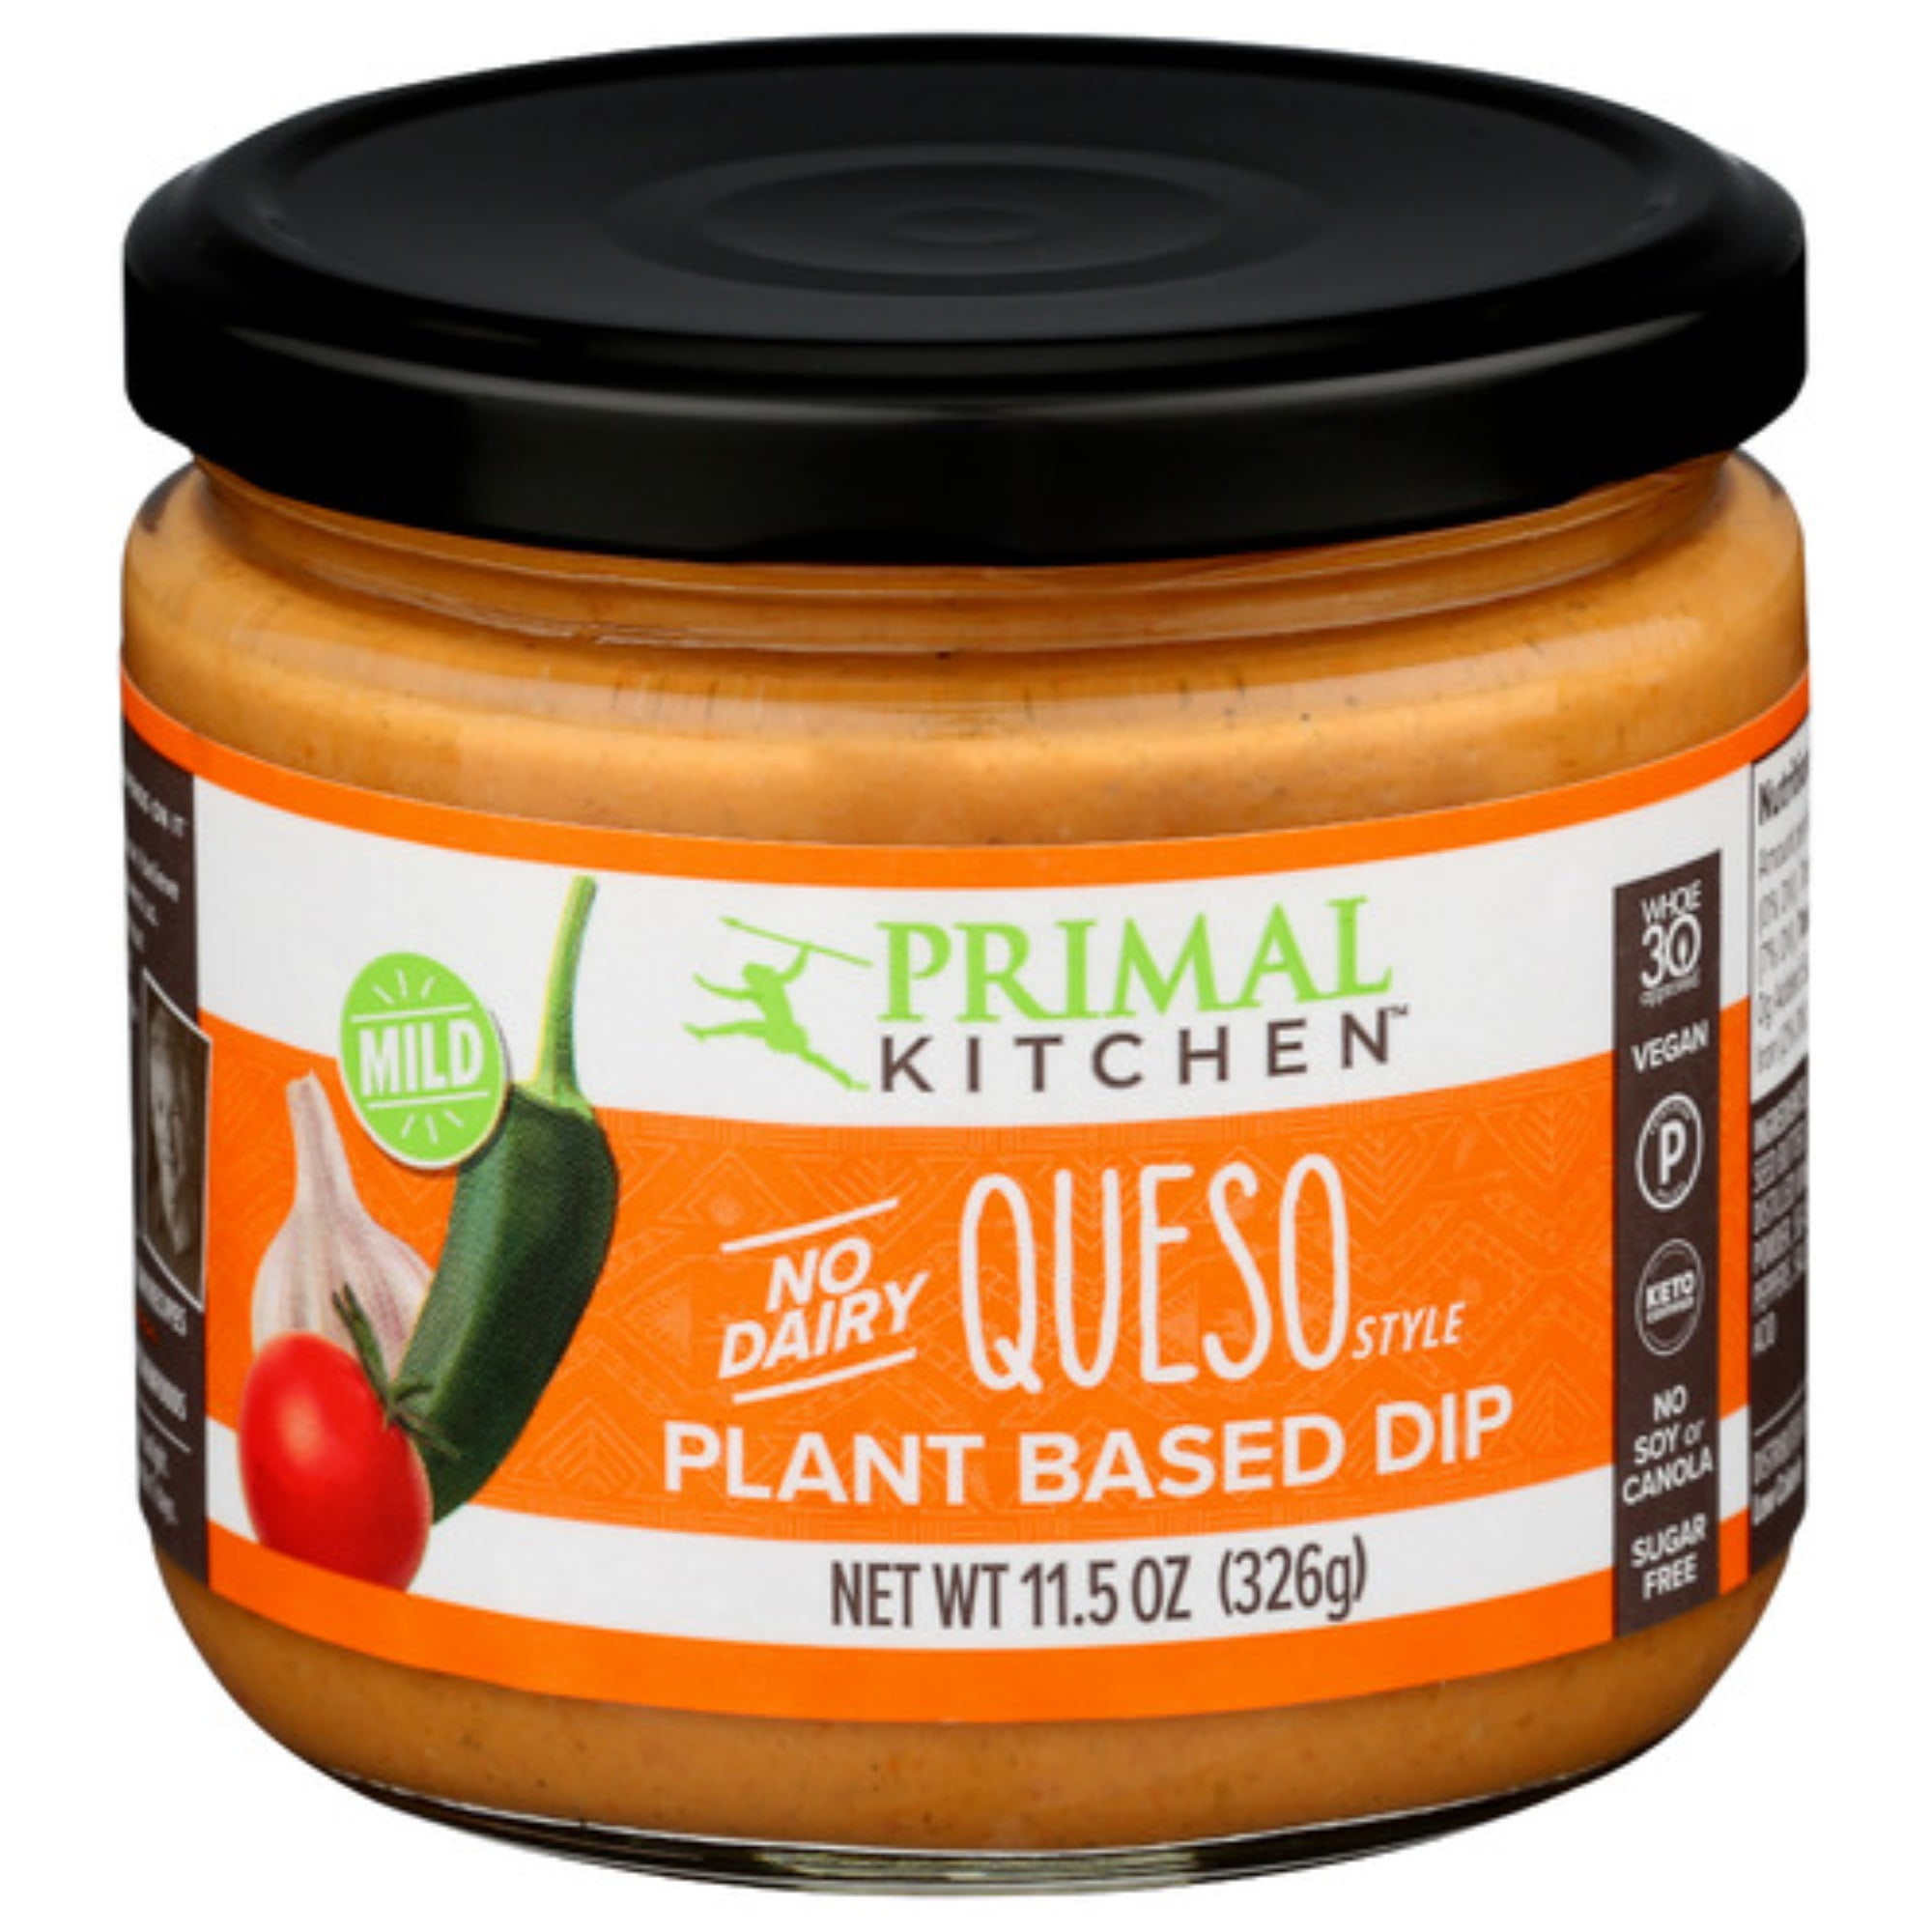 Primal Kitchen - Plant Based Dip Queso Style - 11.5 oz.